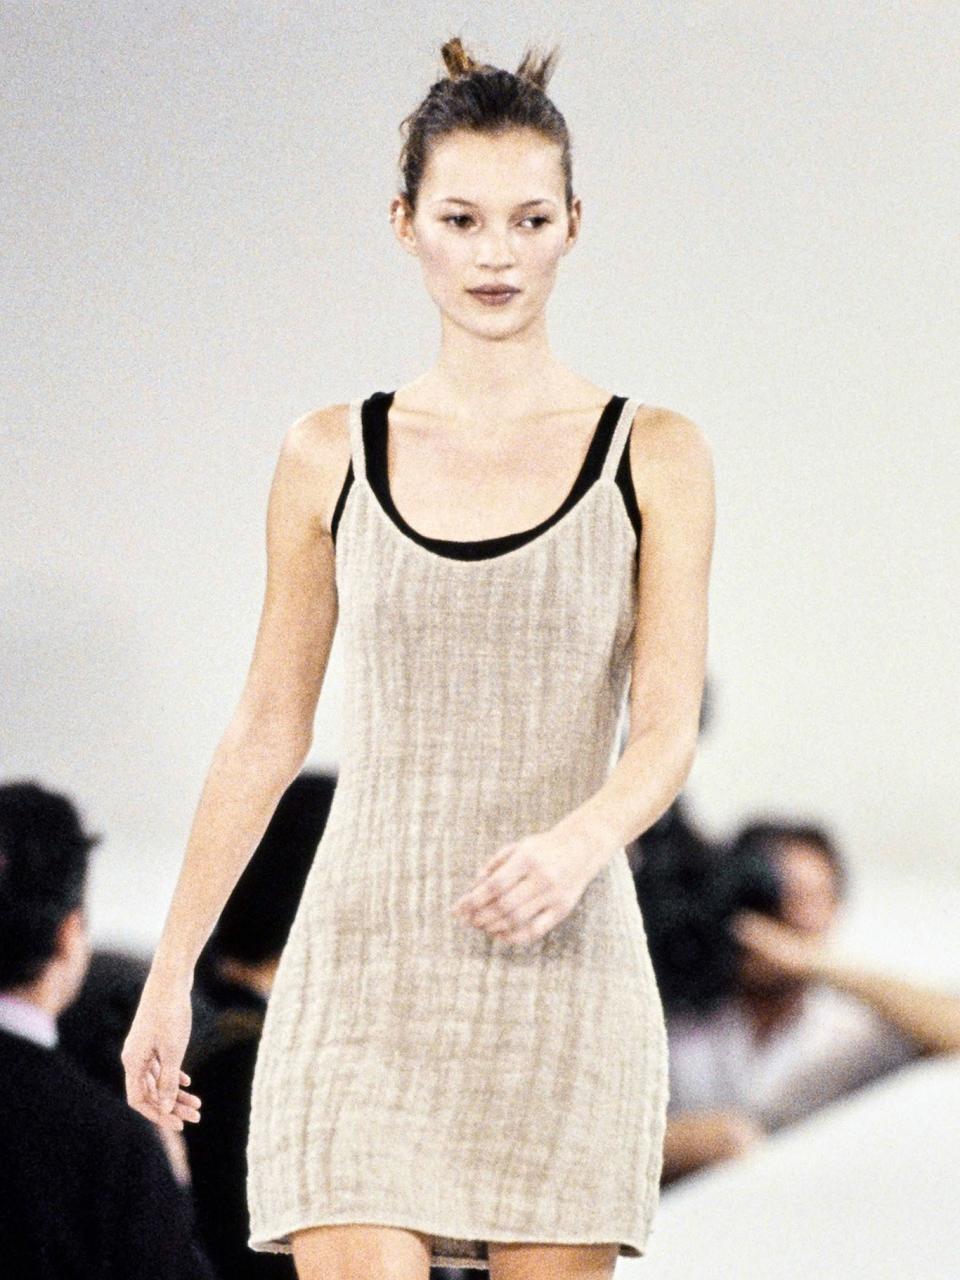 From a fresh-faced Kate Moss on the Spring 1994 runway to a subtle speck of silver in Fall 2017, less-is-more beauty has long reigned at Calvin Klein.